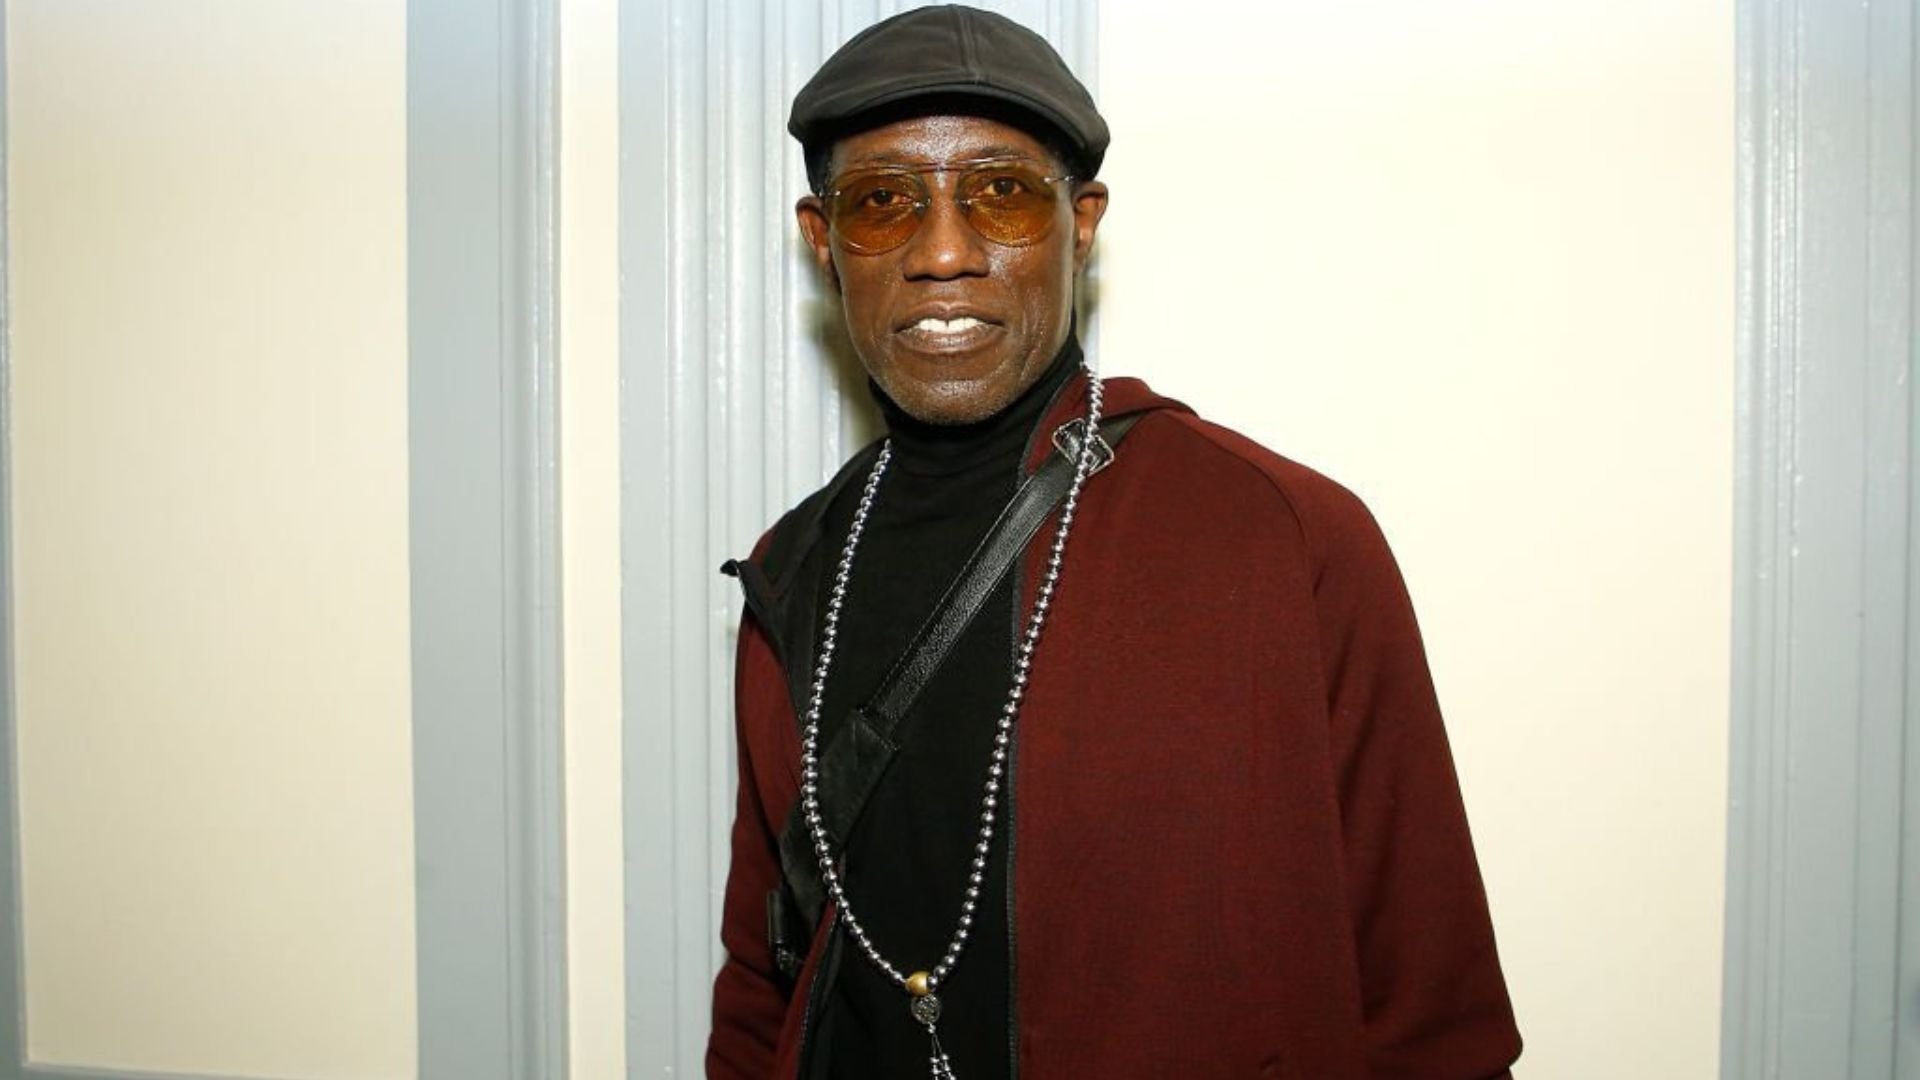 Wesley Snipes' Weight Loss